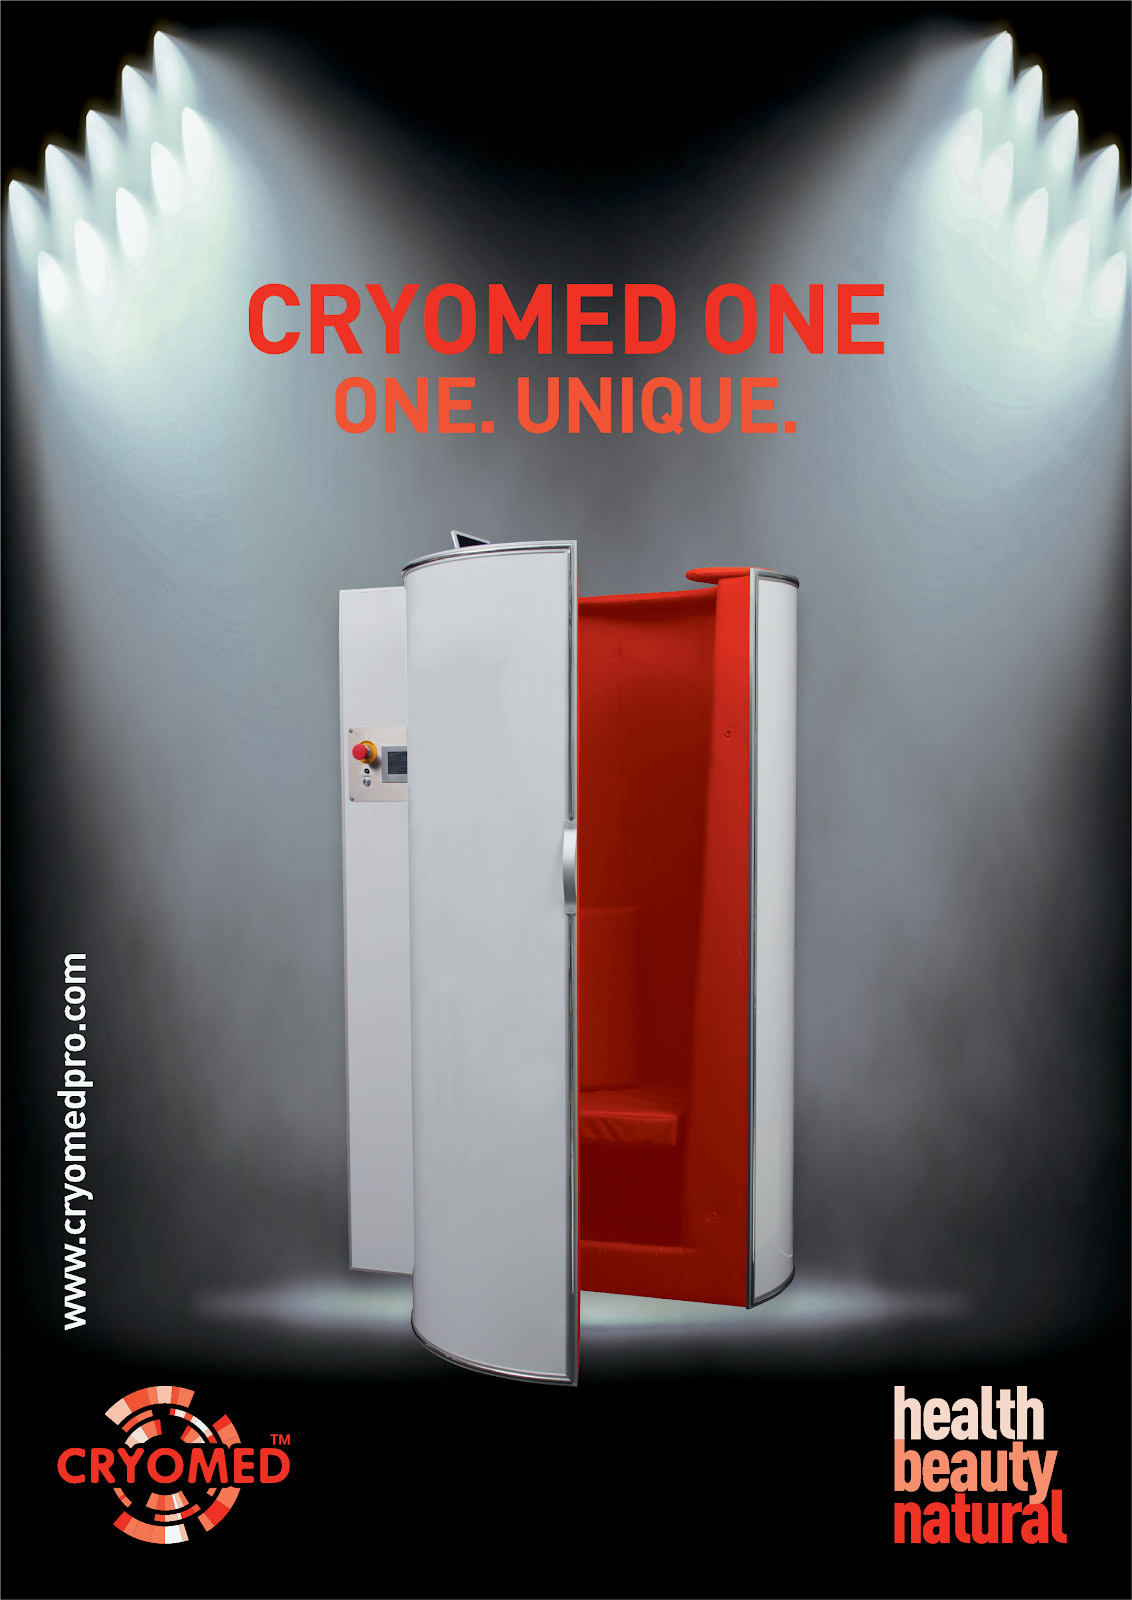 Cryomed-plakat A0 - 20 euro